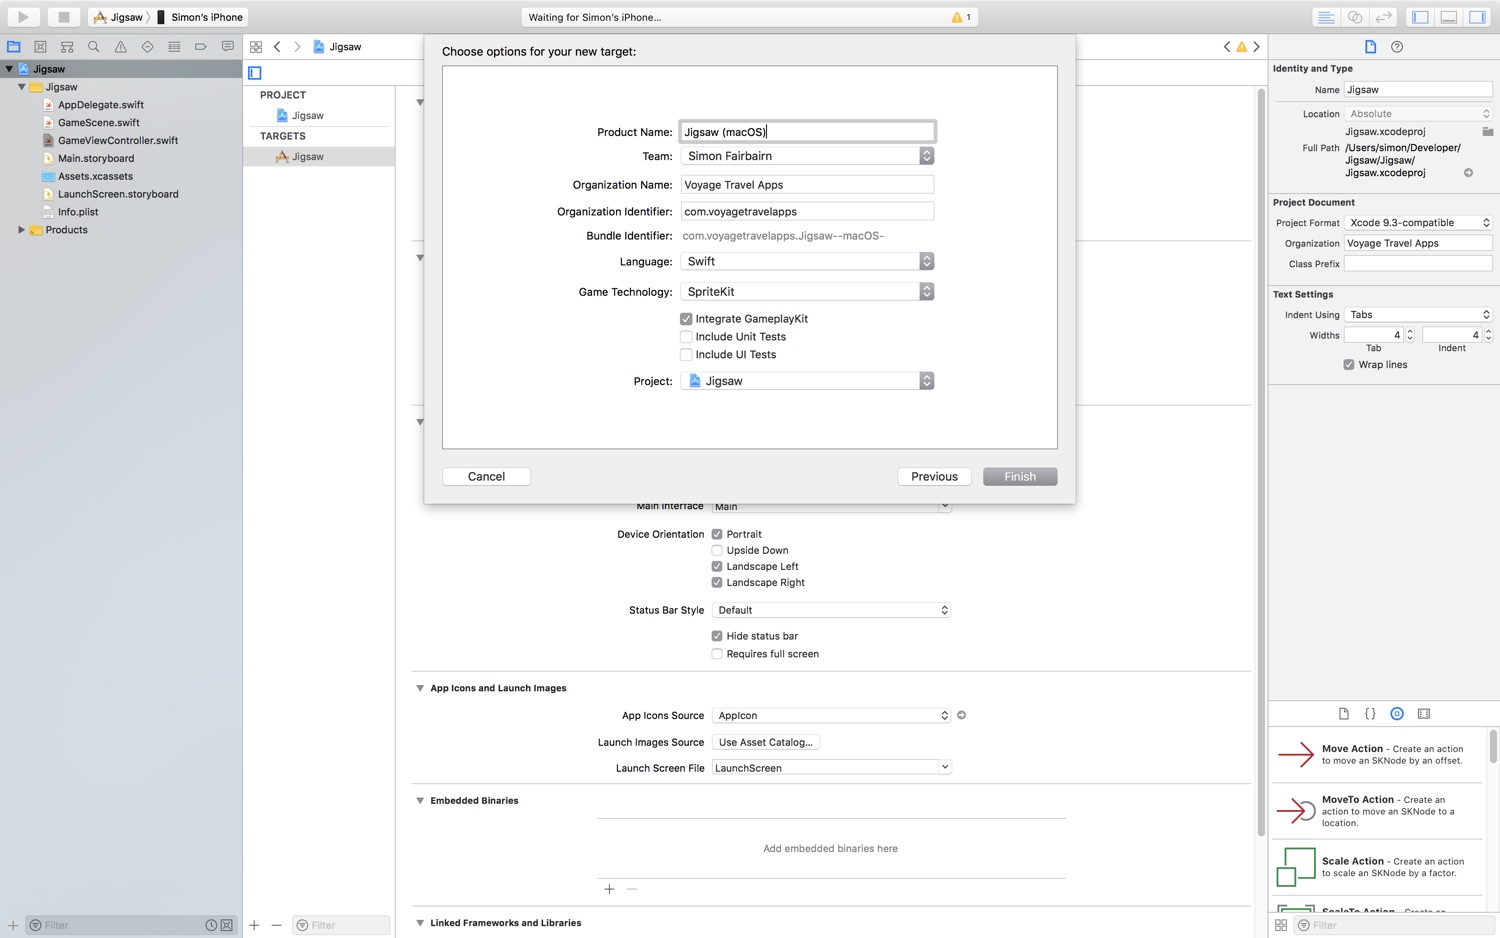 A screenshot of Xcode's New Target Options pane, where a list of options are shown. The important options are that the language is Swift, the Game Technology is SpriteKit, and Integrate GameplayKit is selected and Unit and UI Tests are not selected.